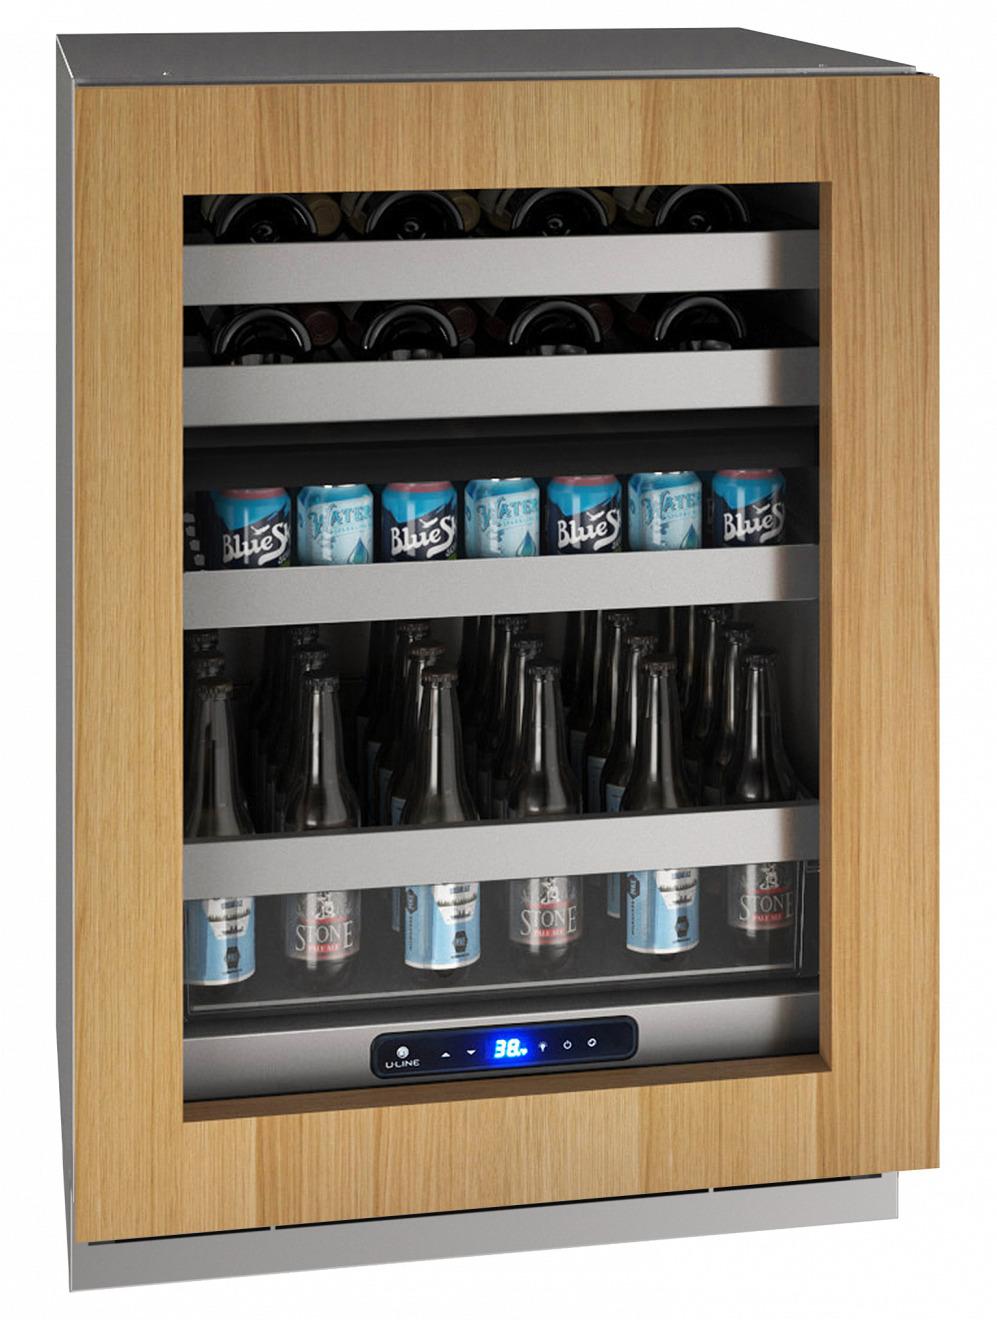 U-Line UHBD524IG01A Hbd524 24" Dual-Zone Beverage Center With Integrated Frame Finish And Field Reversible Door Swing (115 V/60 Hz Volts /60 Hz Hz)